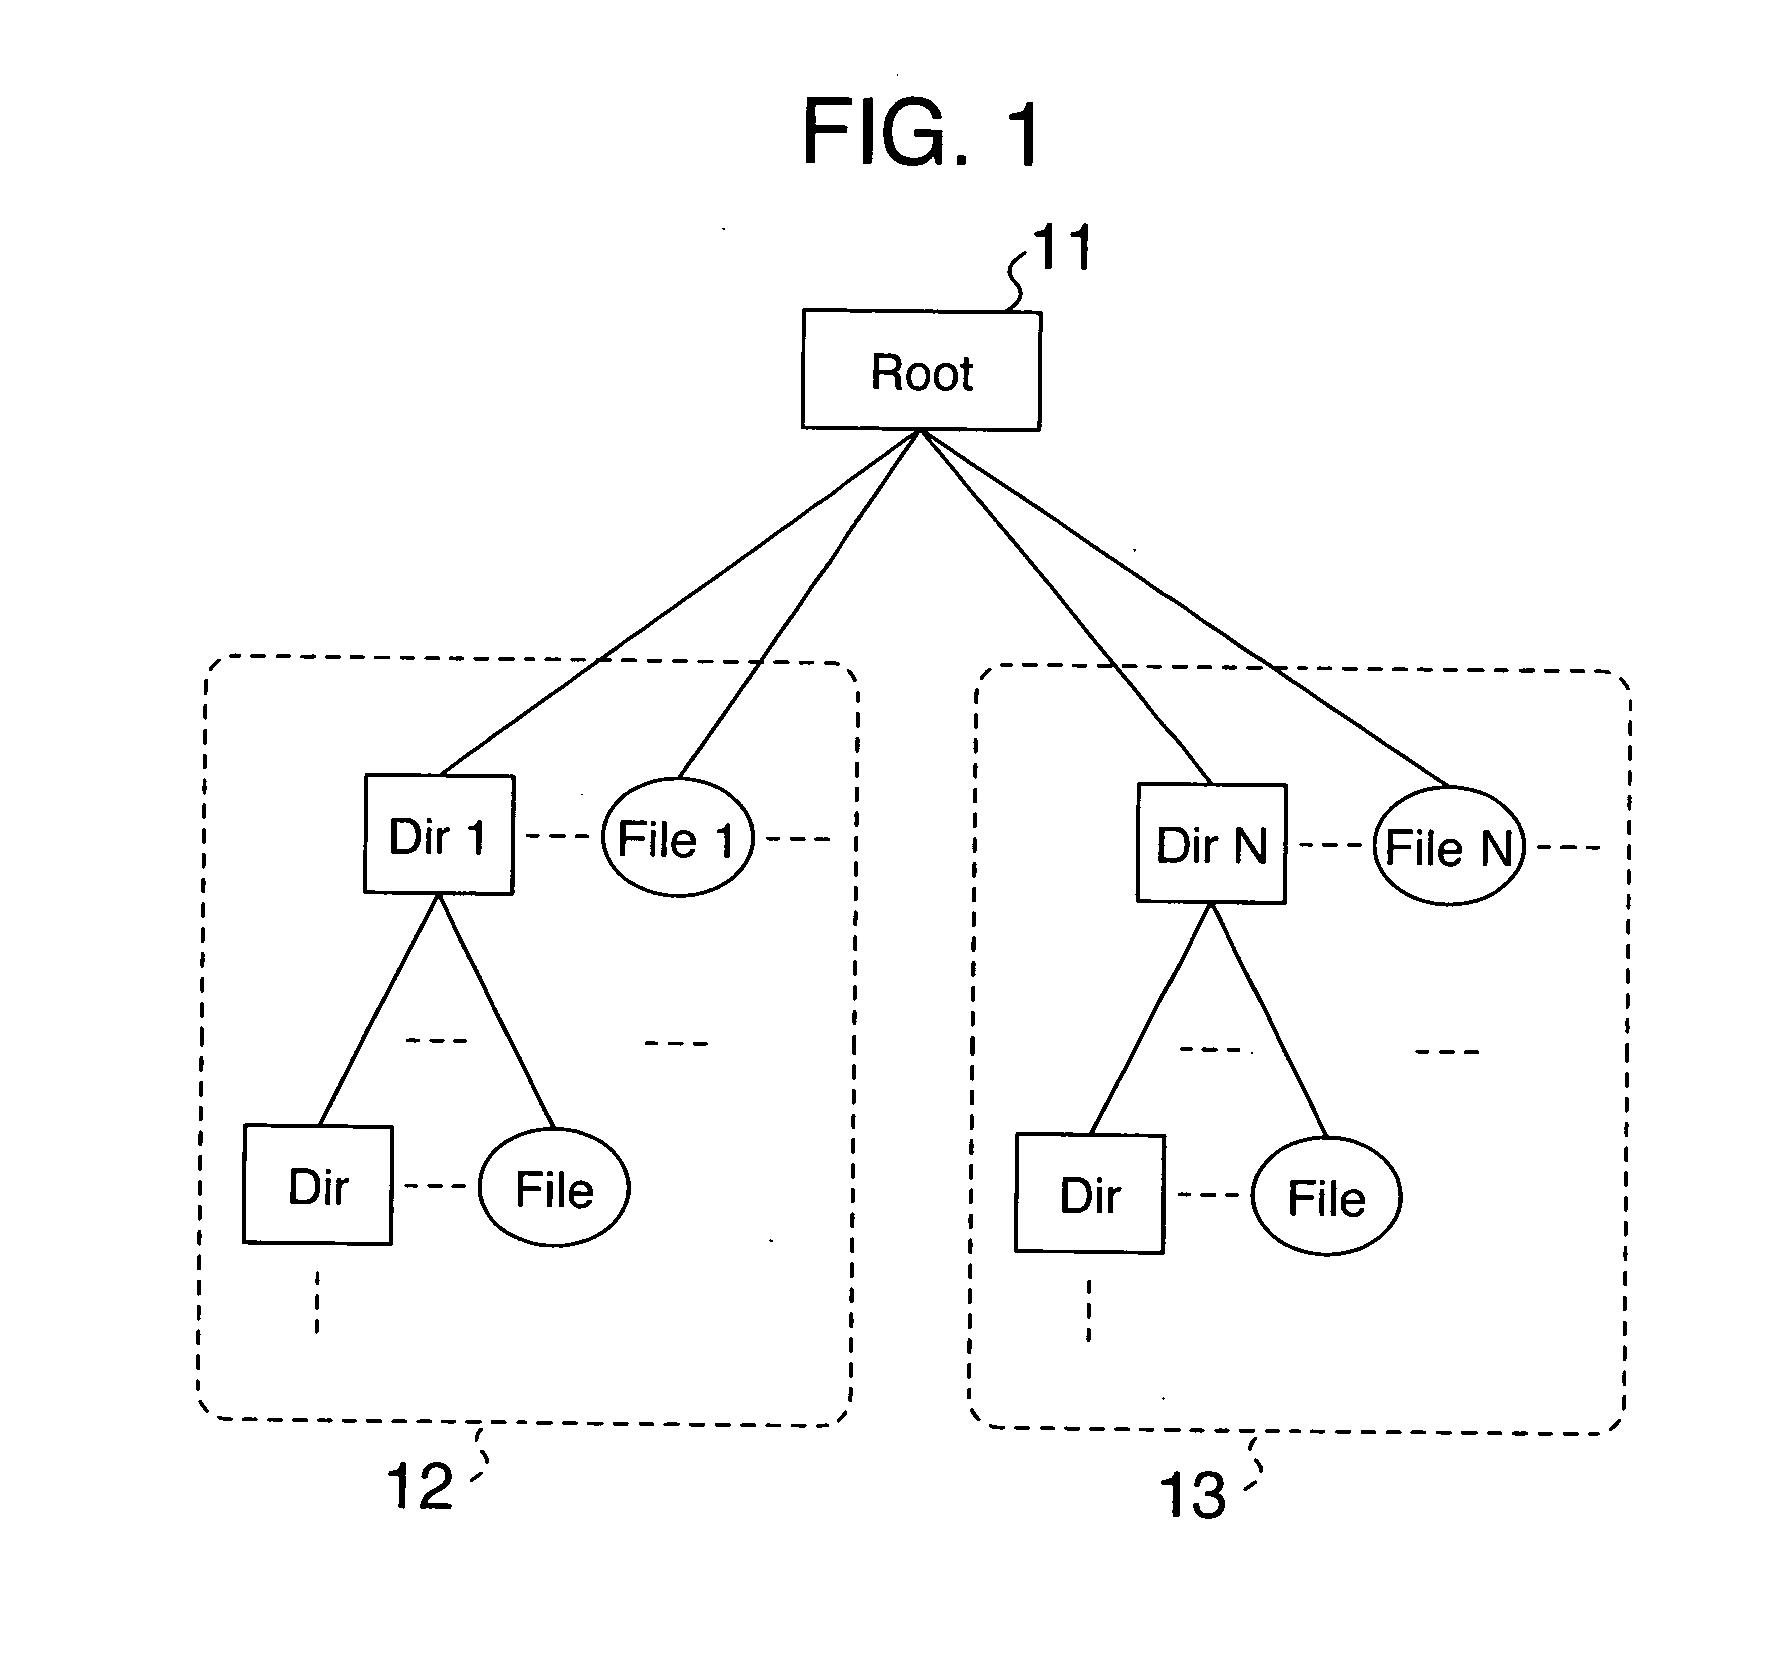 Data management and control system in semiconductor flush memory and semiconductor flush memory accommodation apparatus